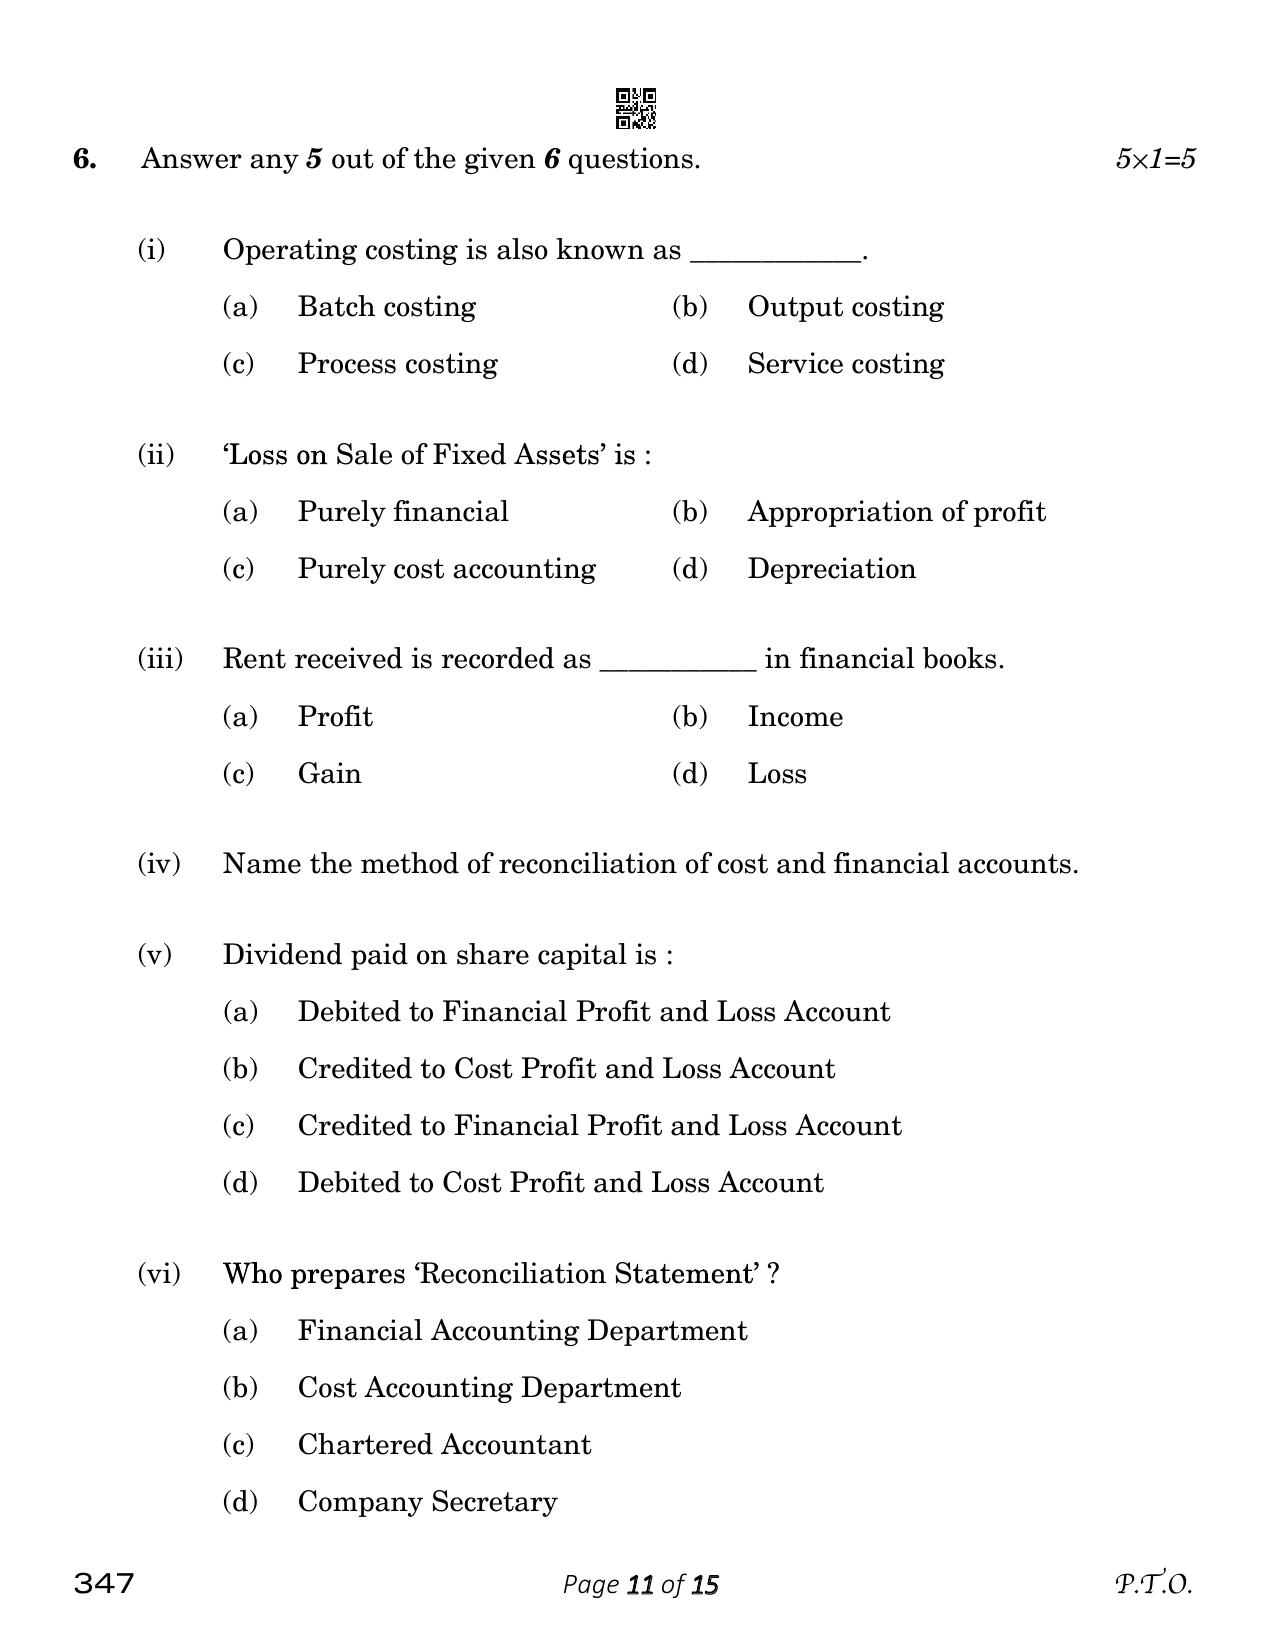 CBSE Class 12 Cost Accounting (Compartment) 2023 Question Paper - Page 11